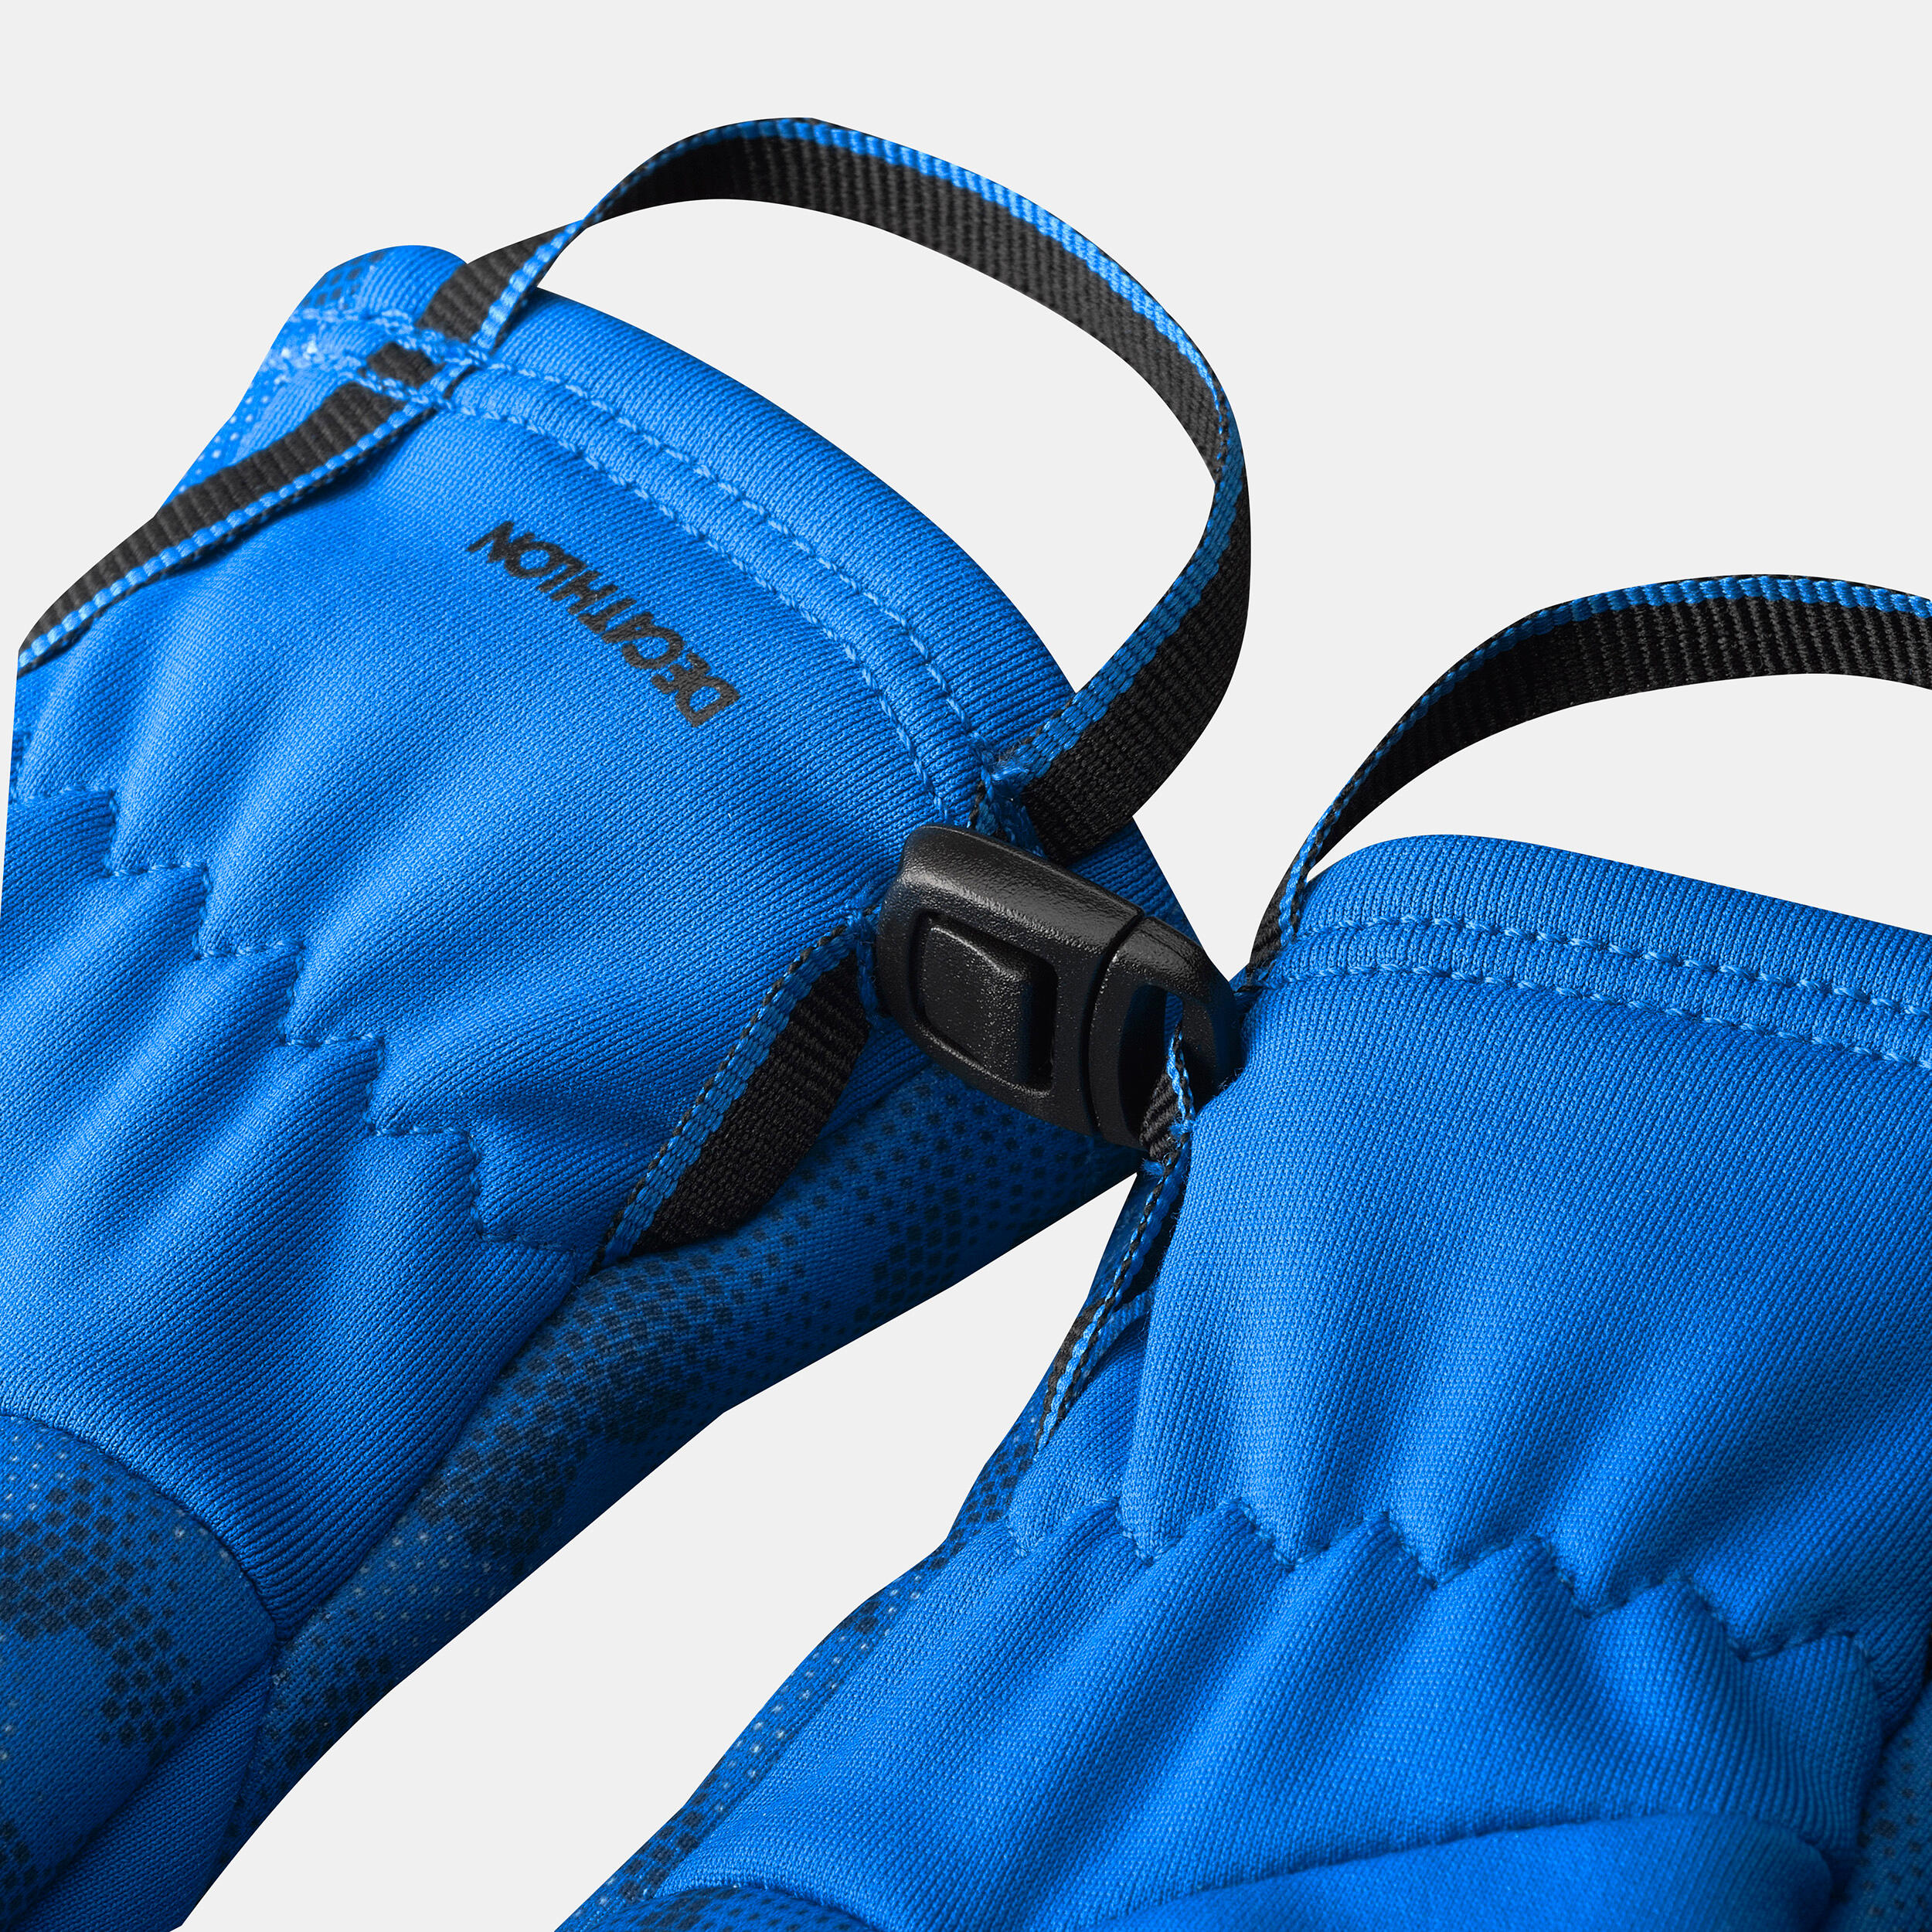 KIDS' HIKING TOUCHSCREEN COMPATIBLE GLOVES - SH500 MOUNTAIN STRETCH - AGE 6-14  3/4